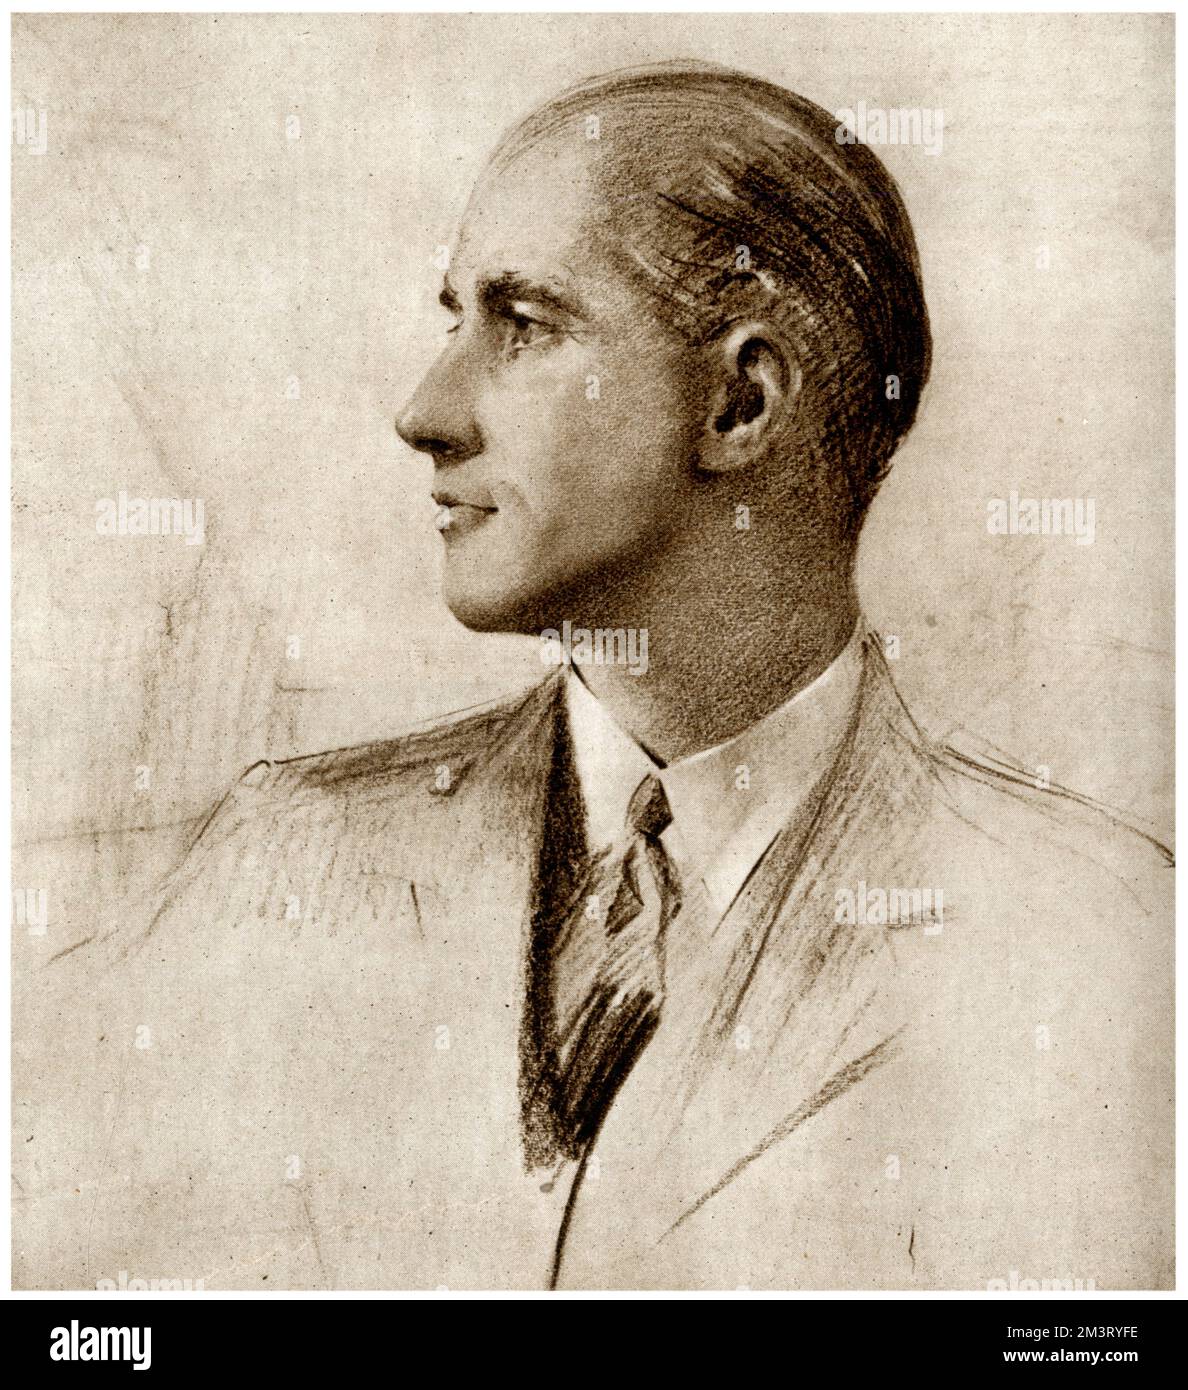 Portrait of Edward ('Peter') Huskinson (1878 - 1941), editor of The Tatler for thirty-two years until his retirement in 1940 and a director of Illustrated Newspapers Ltd. He was accidentally killed, aged 63, on 14 November 1941 while boarding a moving train in a black-out.     Date: 1941 Stock Photo